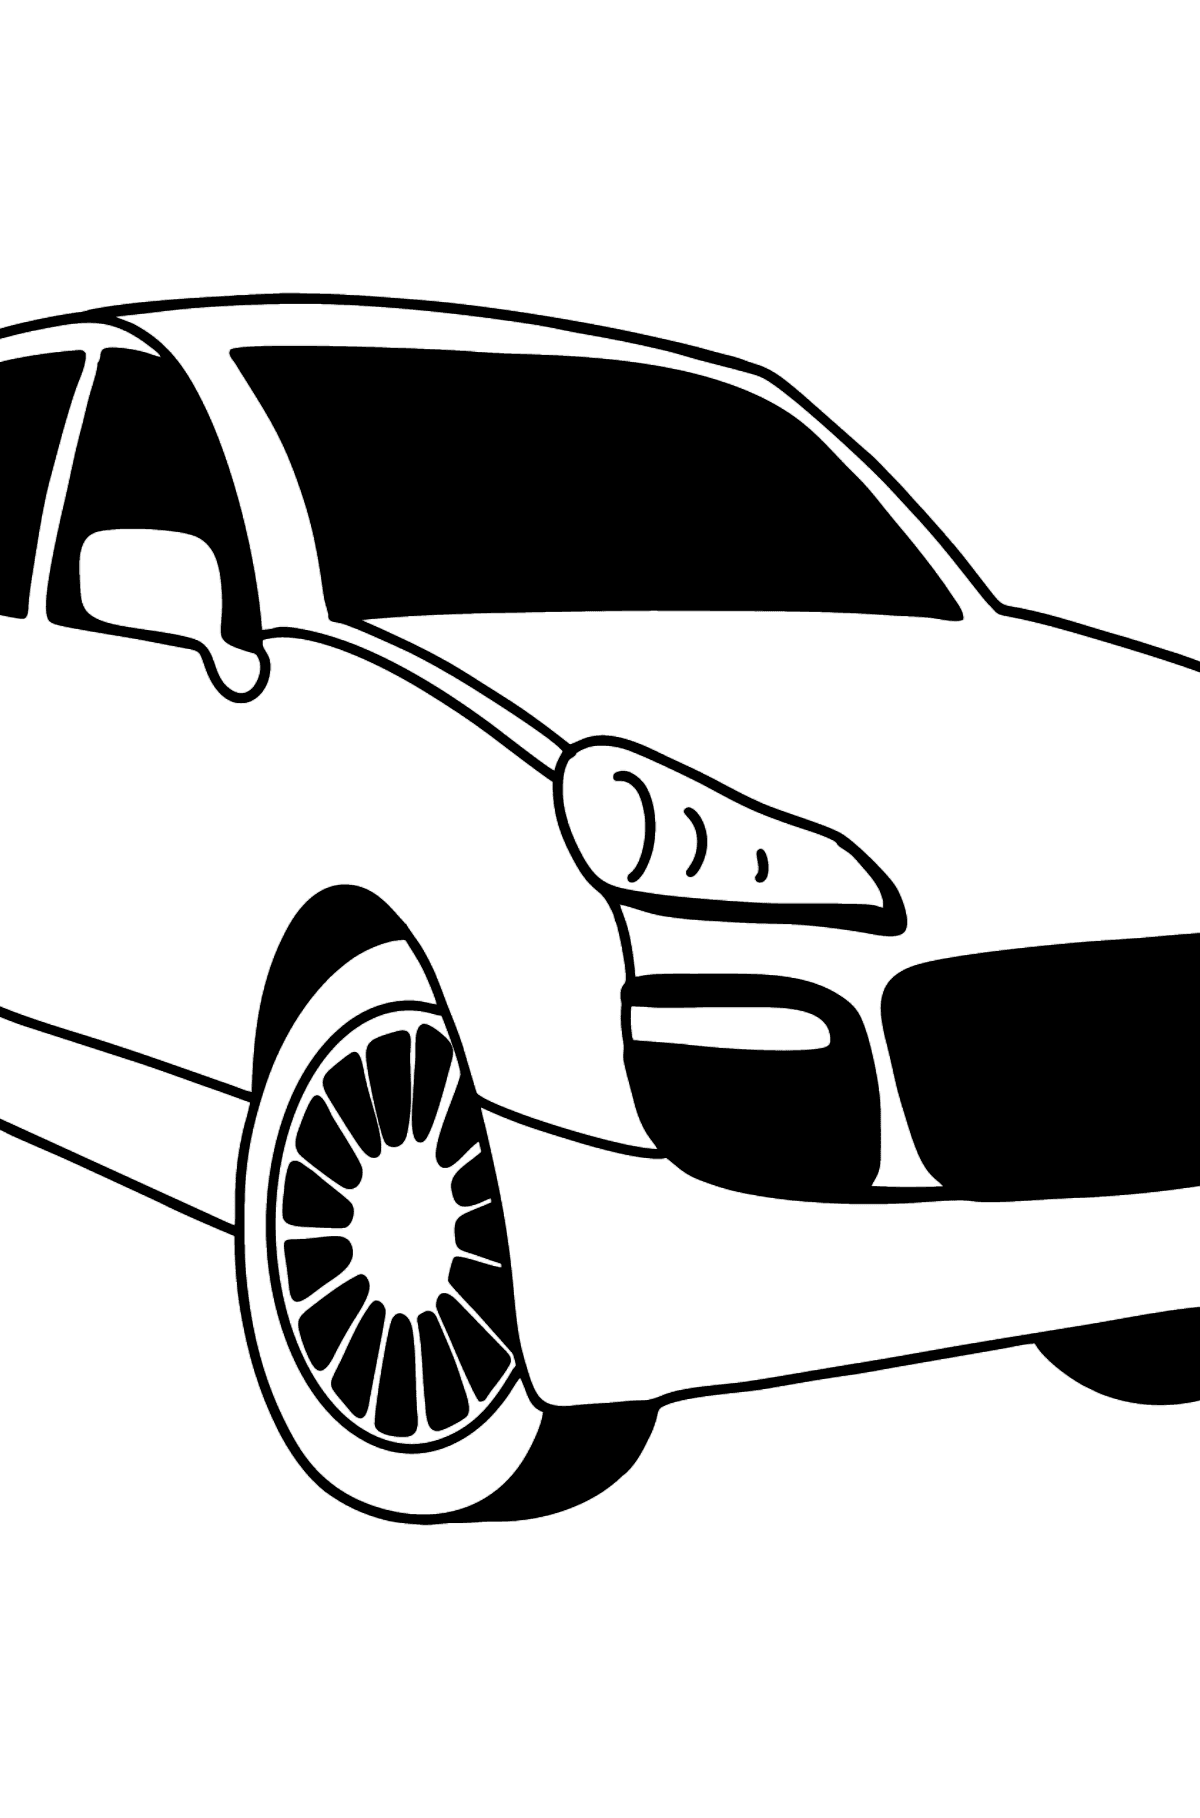 Porsche Cayenne Crossover coloring page - Coloring Pages for Kids